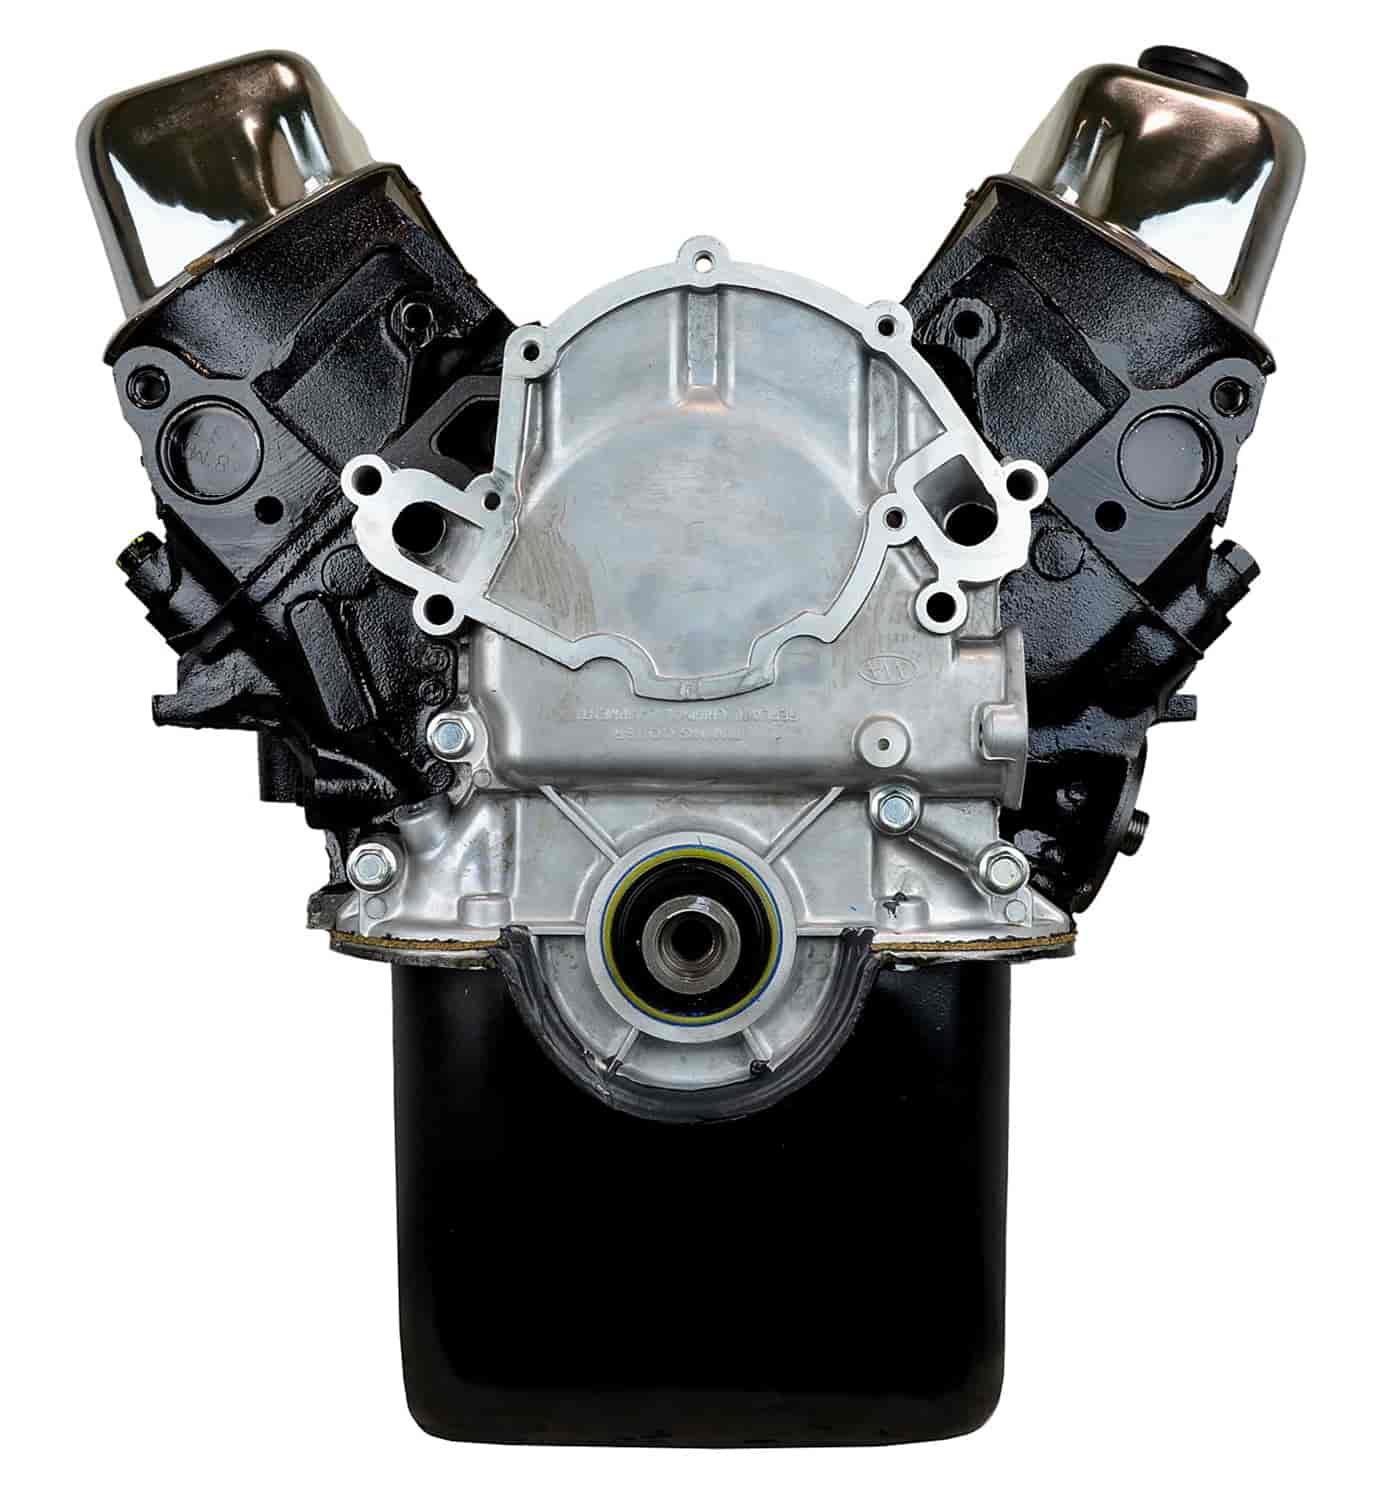 Remanufactured Crate Engine for 1968-1974 Ford/Mercury Car with 302ci/5.0L V8